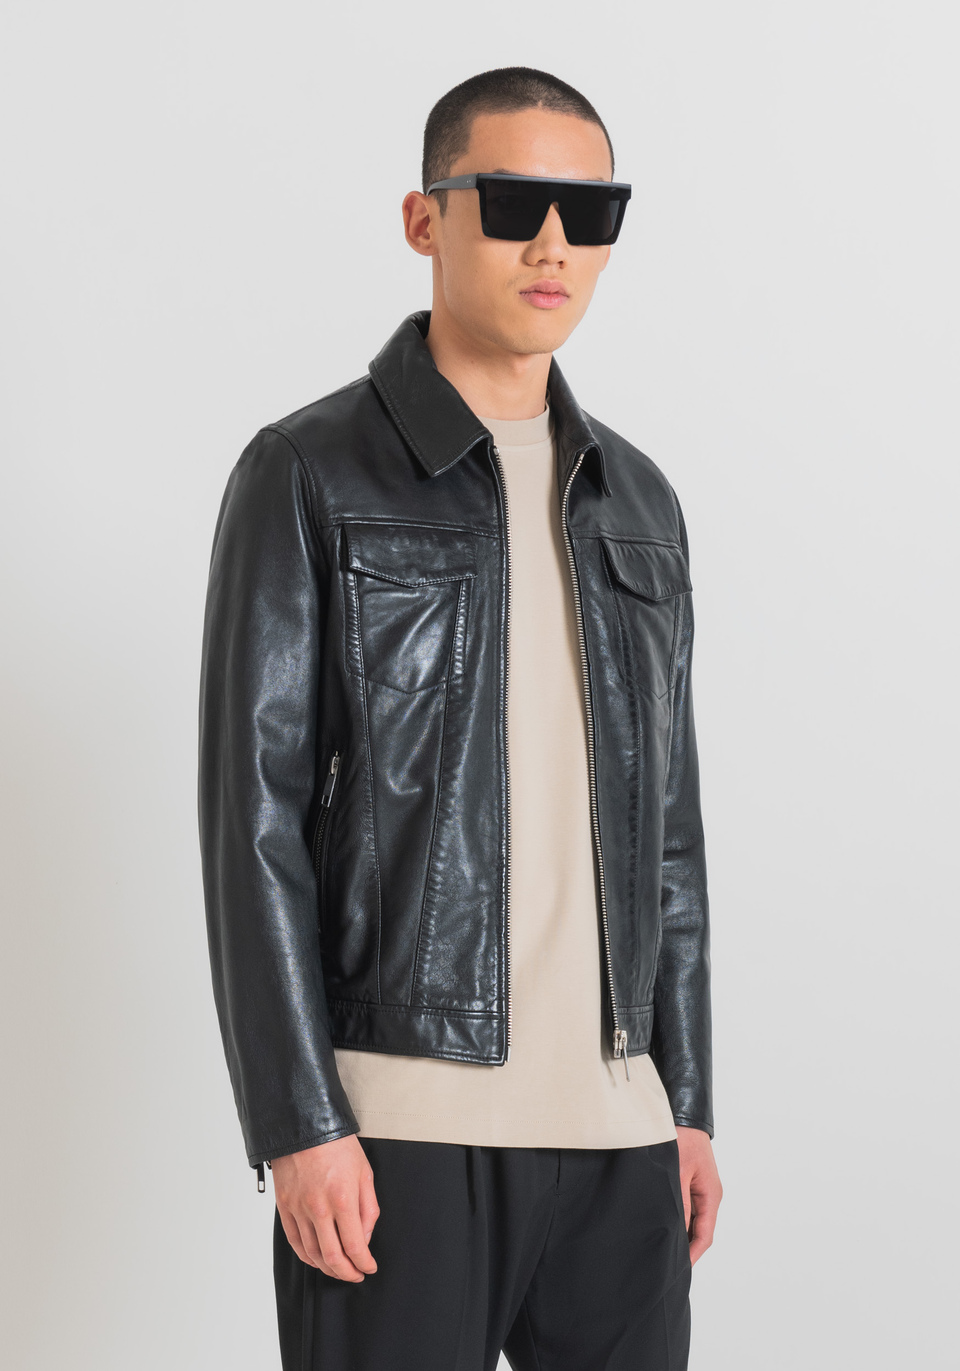 SLIM FIT JACKET IN GENUINE LEATHER WITH SHIRT COLLAR | Antony Morato